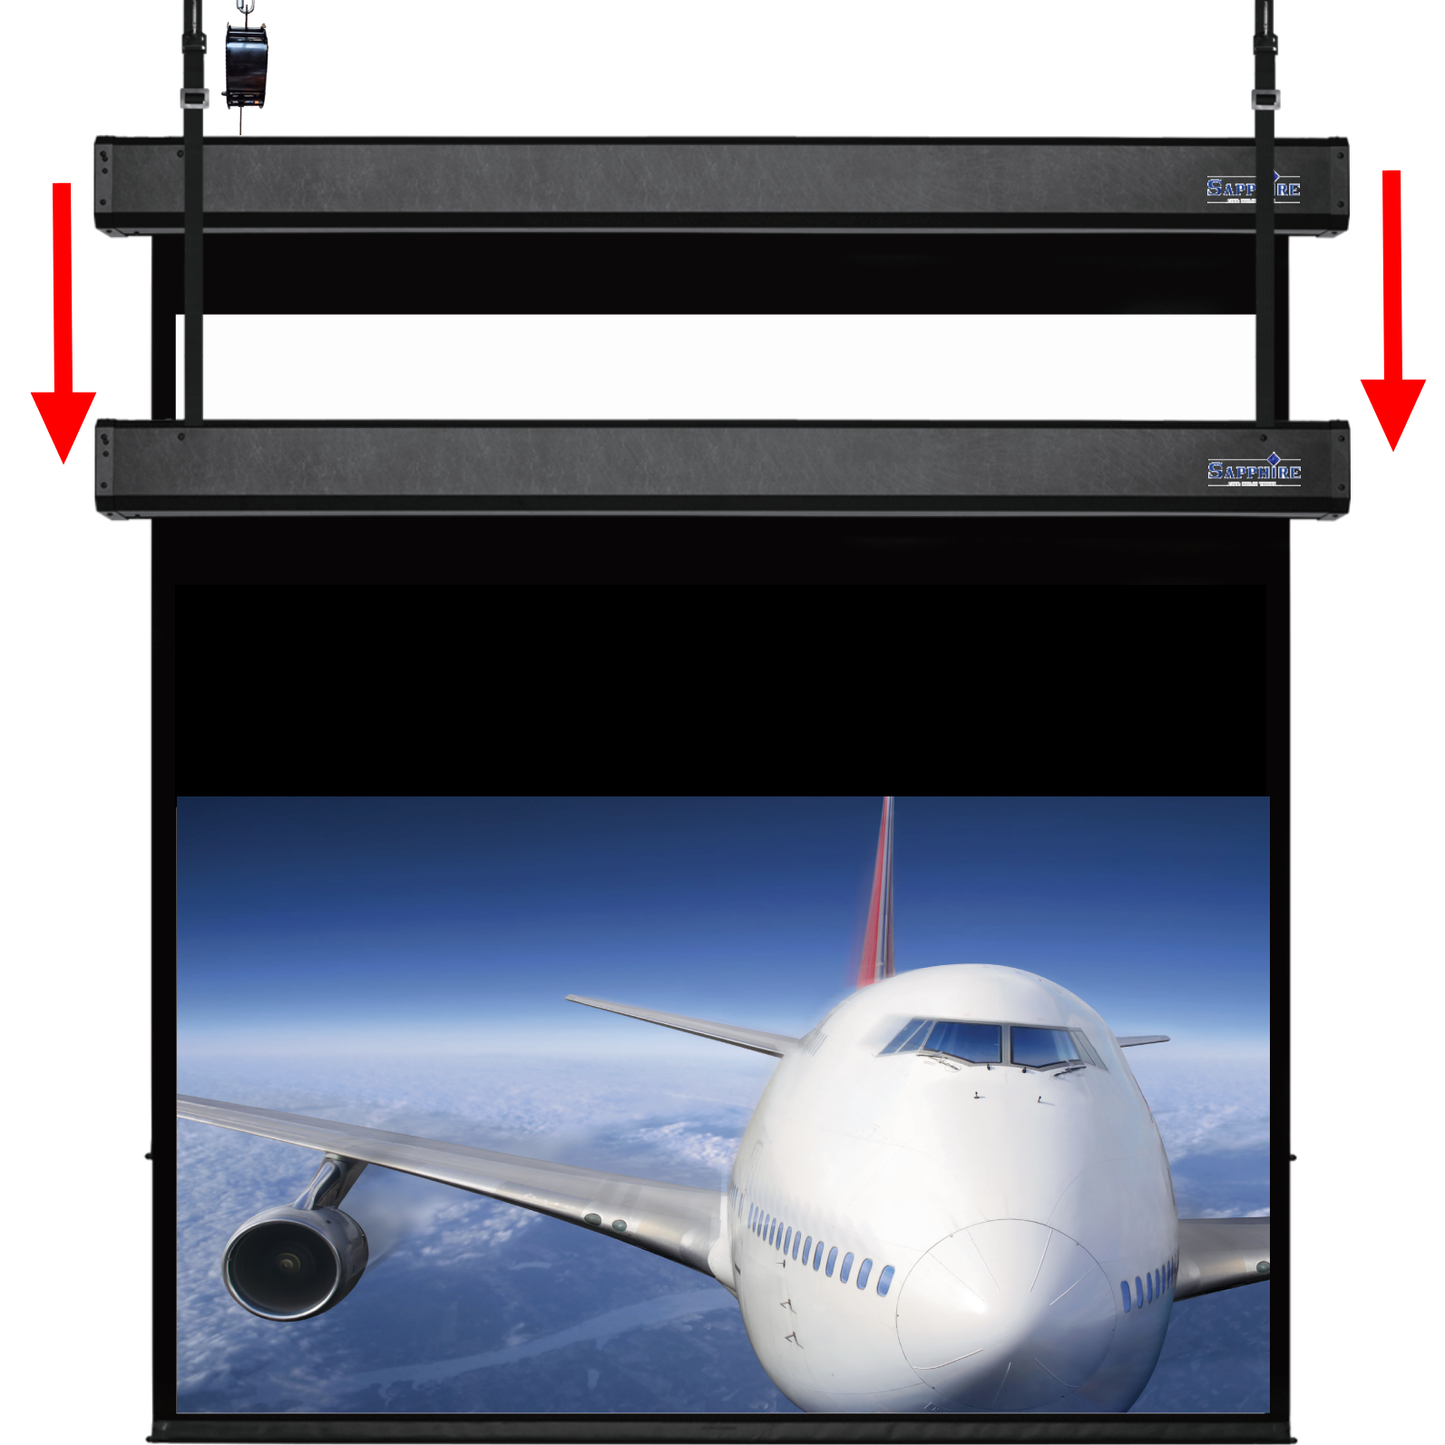 Sapphire Smart Move 4m 16:9 Two Motor Electric Projection Screen Approx Case Dimensions L 4317mm x H 250mm x D 170mm